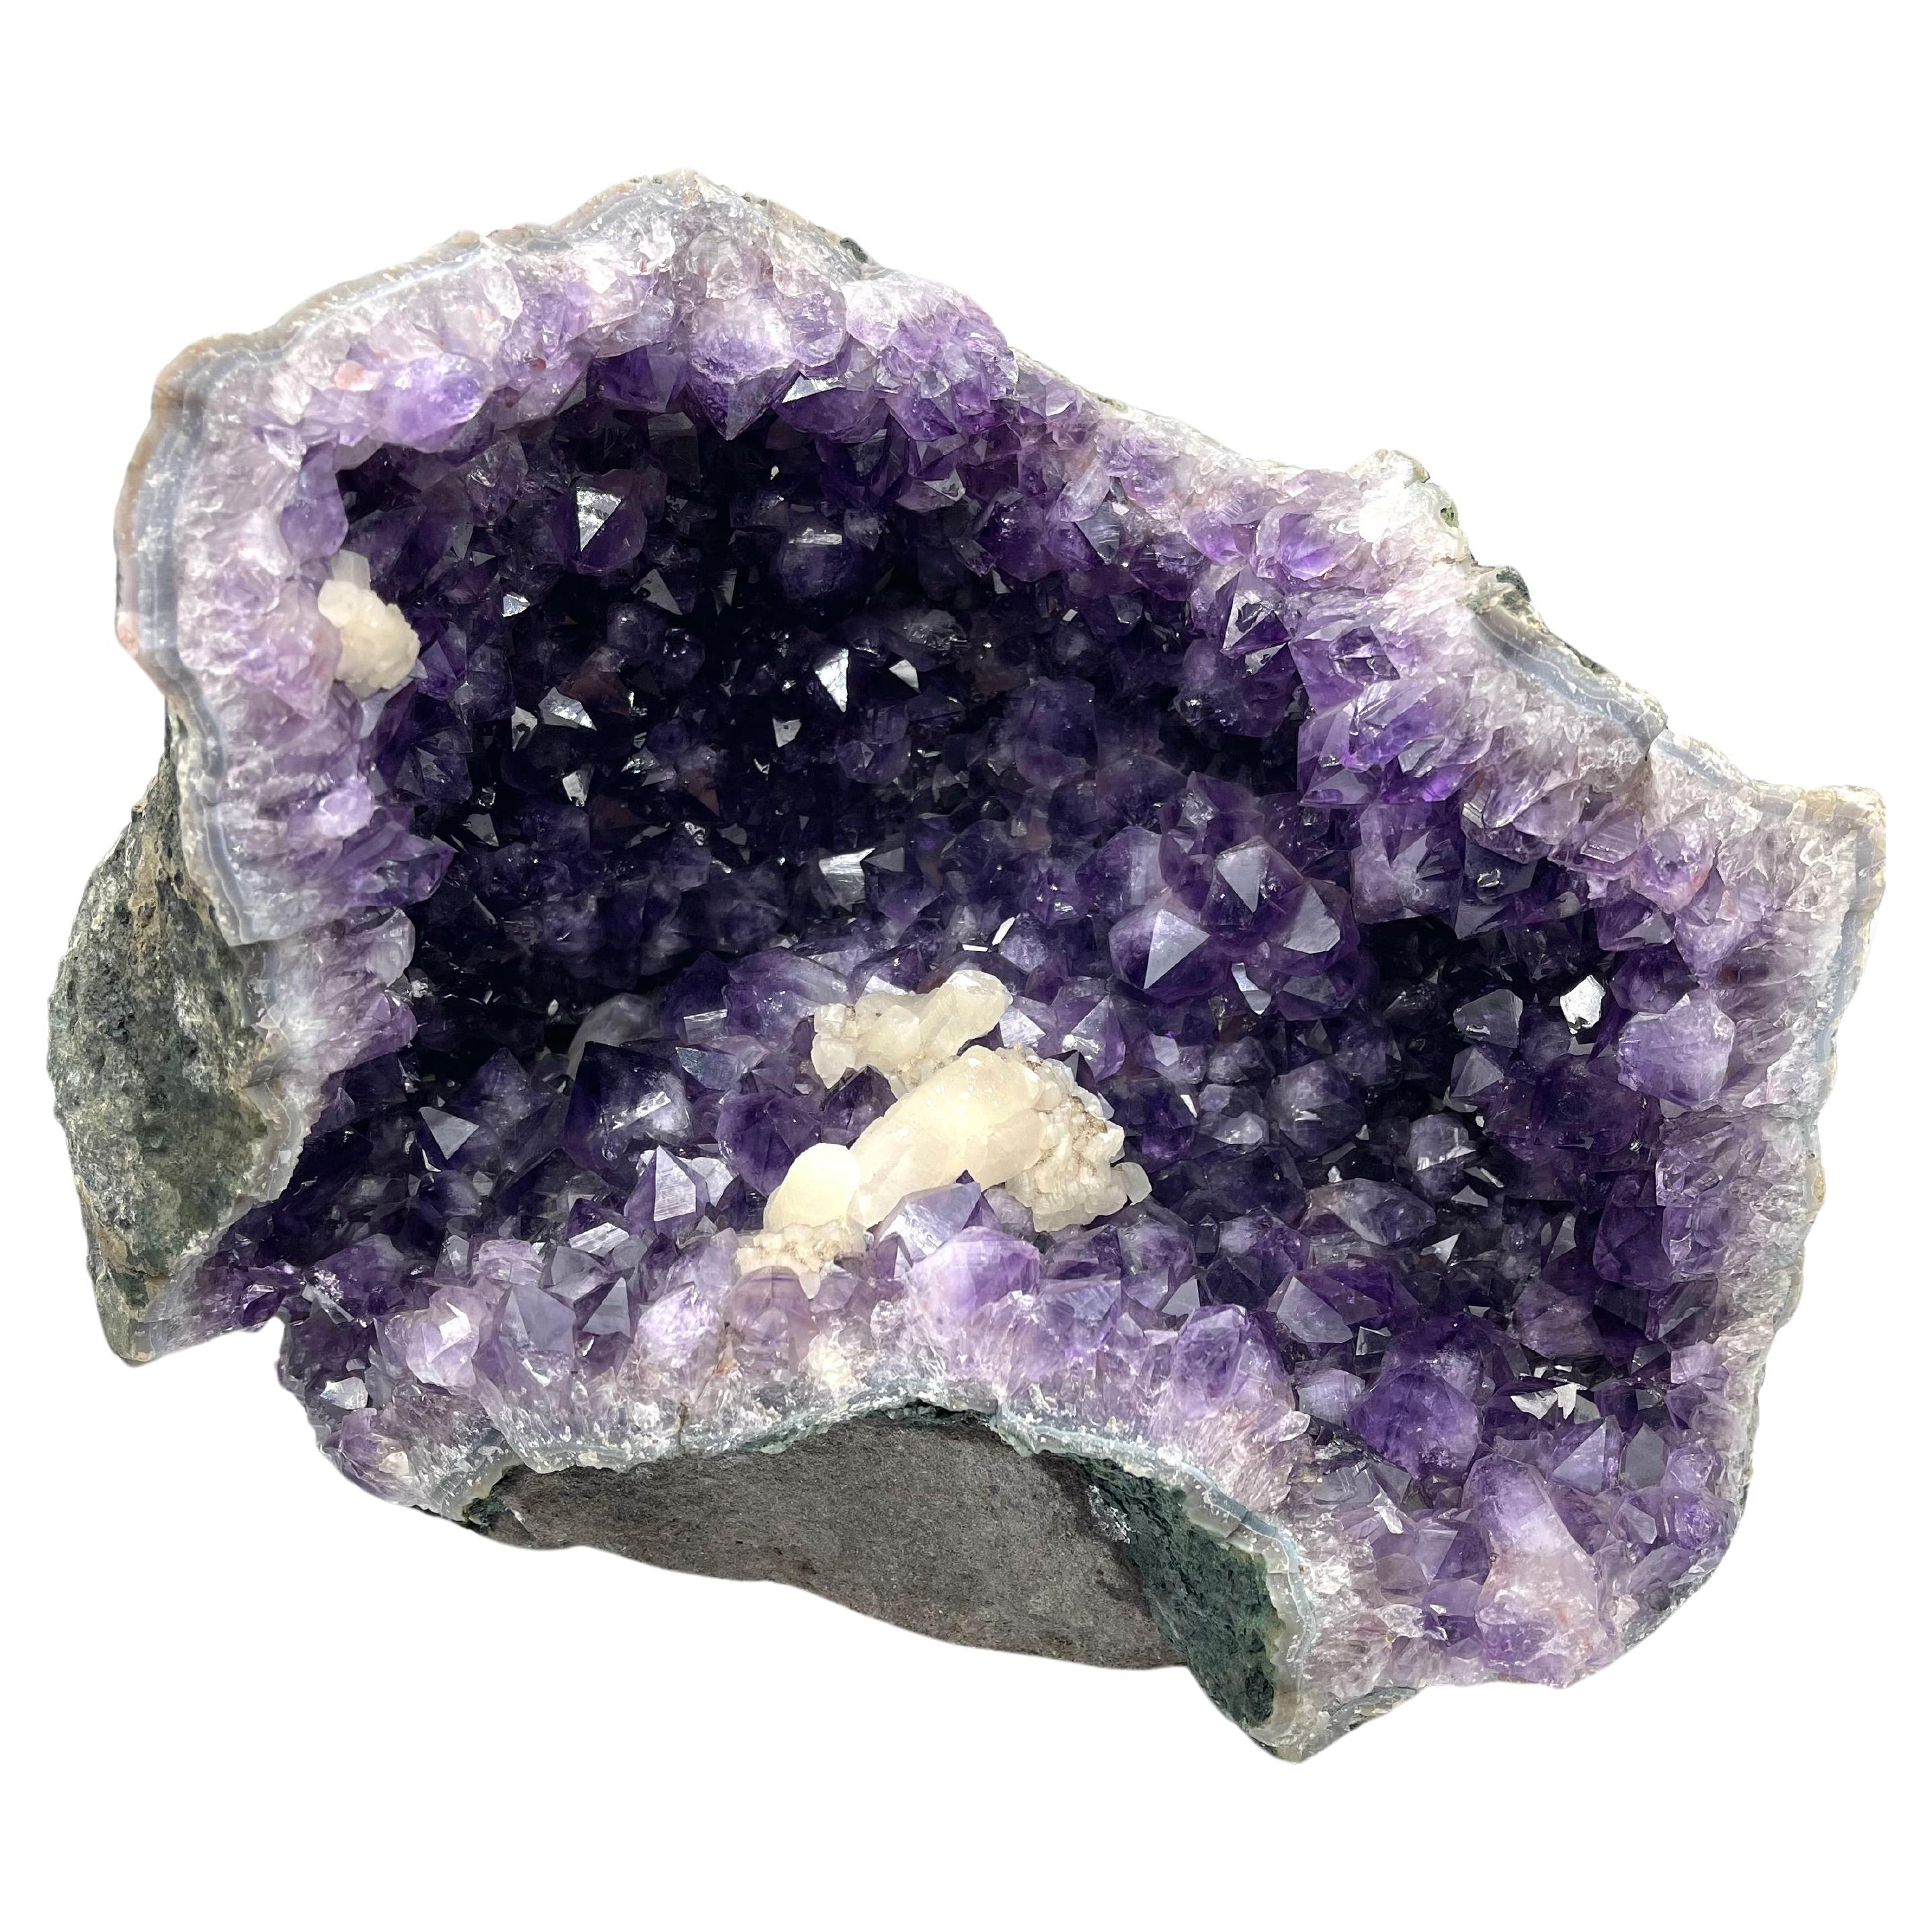 Large geode amethyste with quartz from Morvan France 46lbs 21kg For Sale